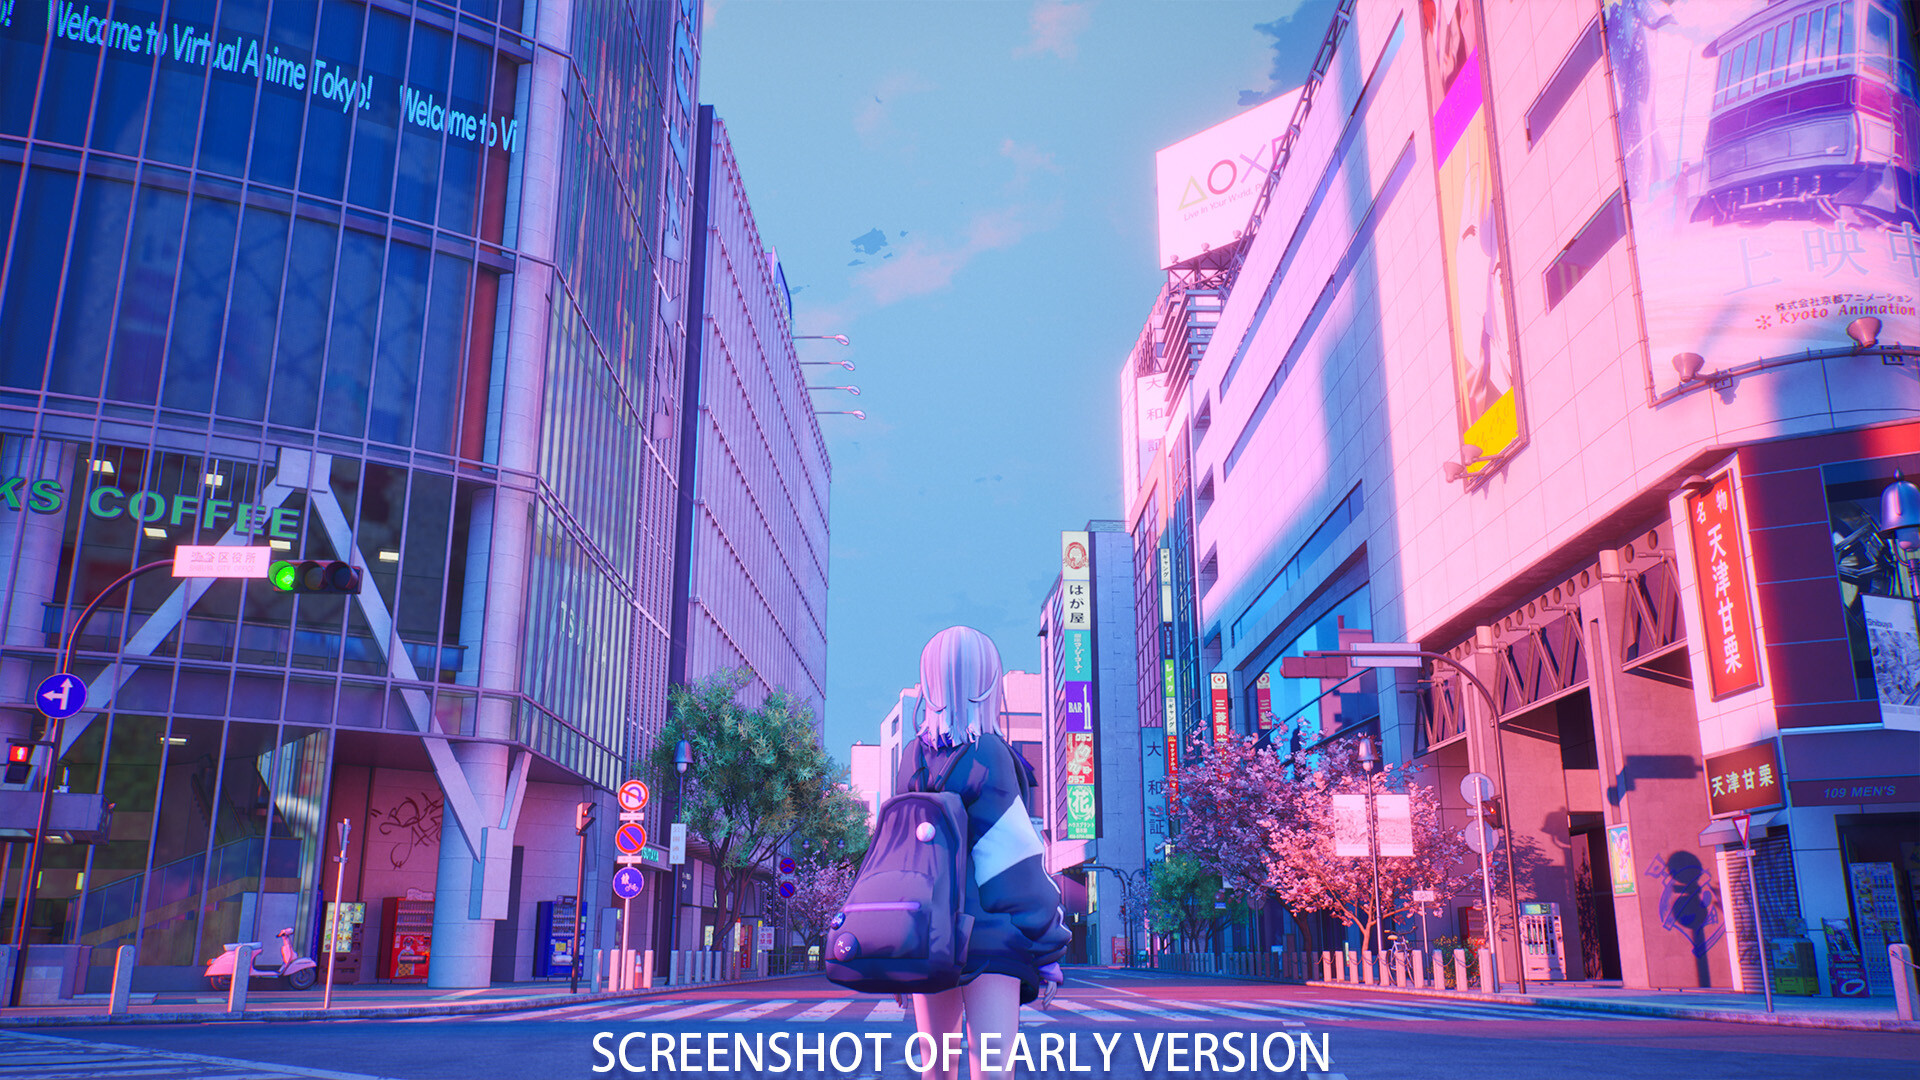 9+ Anime Tokyo Wallpapers for iPhone and Android by Scott Martinez